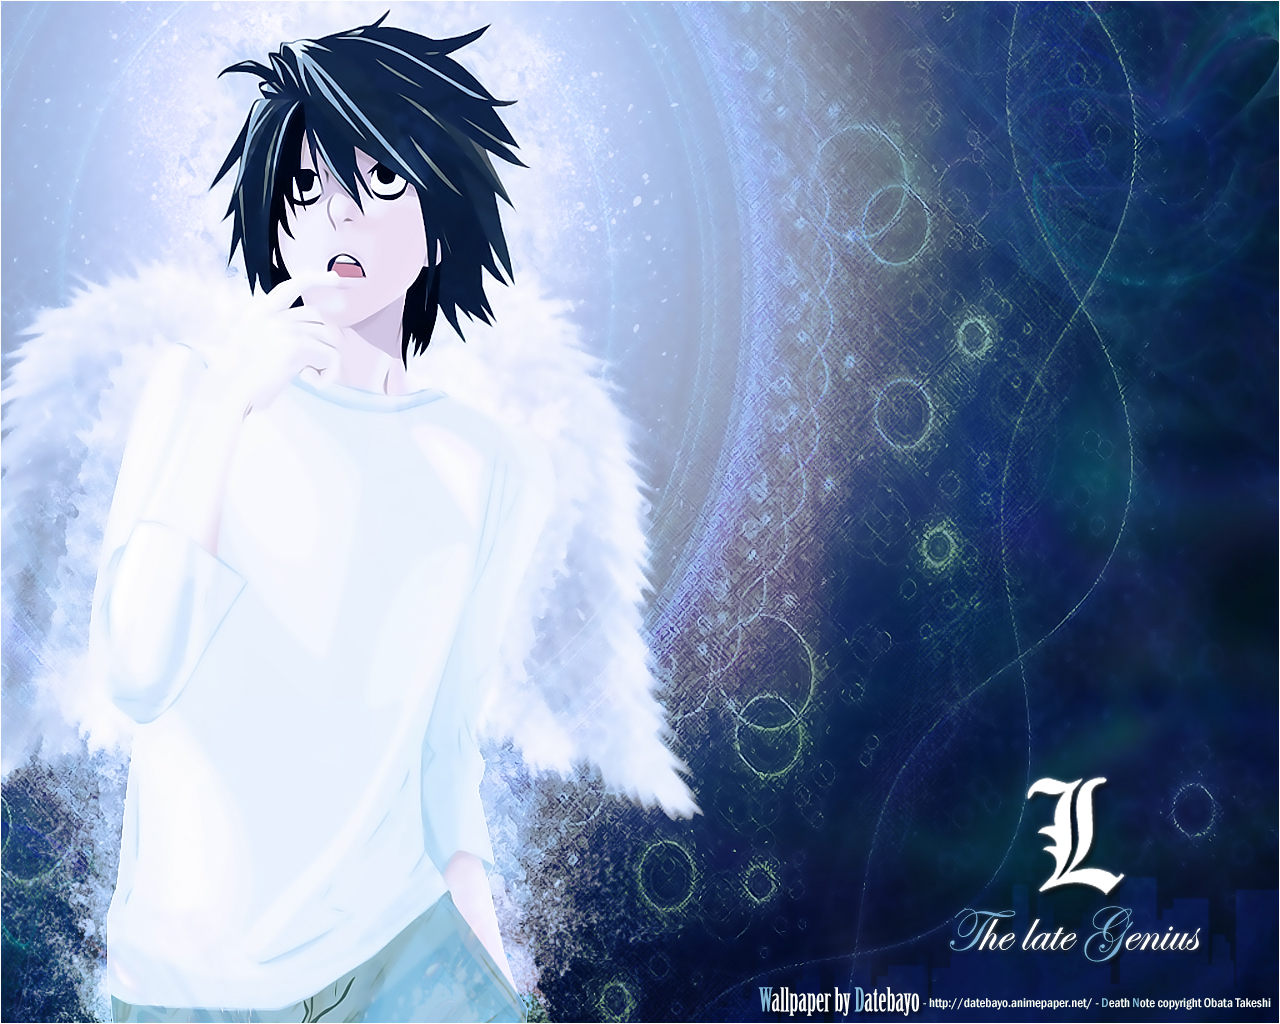 L (Death Note) wallpapers for desktop, download free L (Death Note)  pictures and backgrounds for PC 